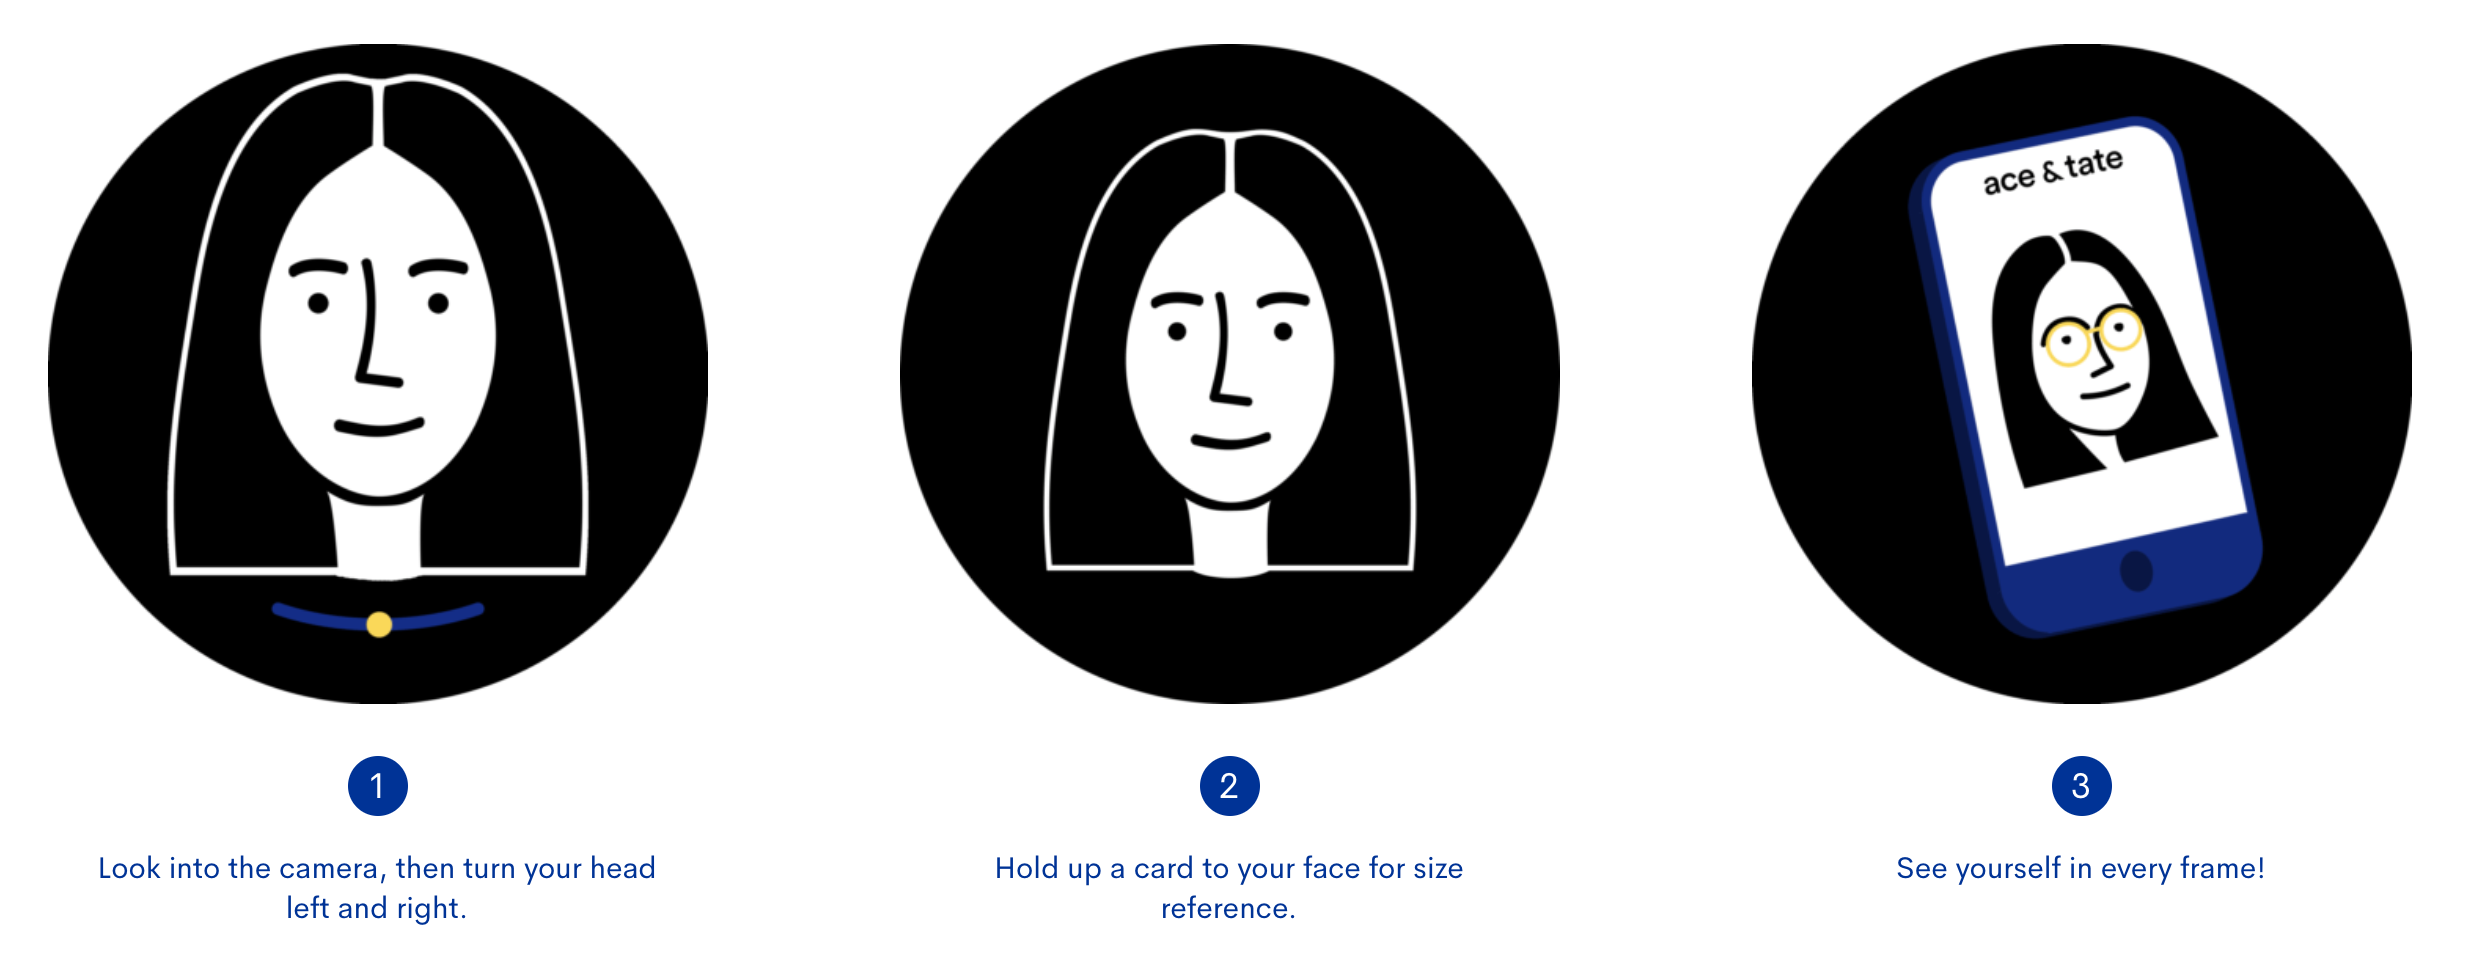 three onboarding images from Ace and Tate's site that explain how to take the selfies needed